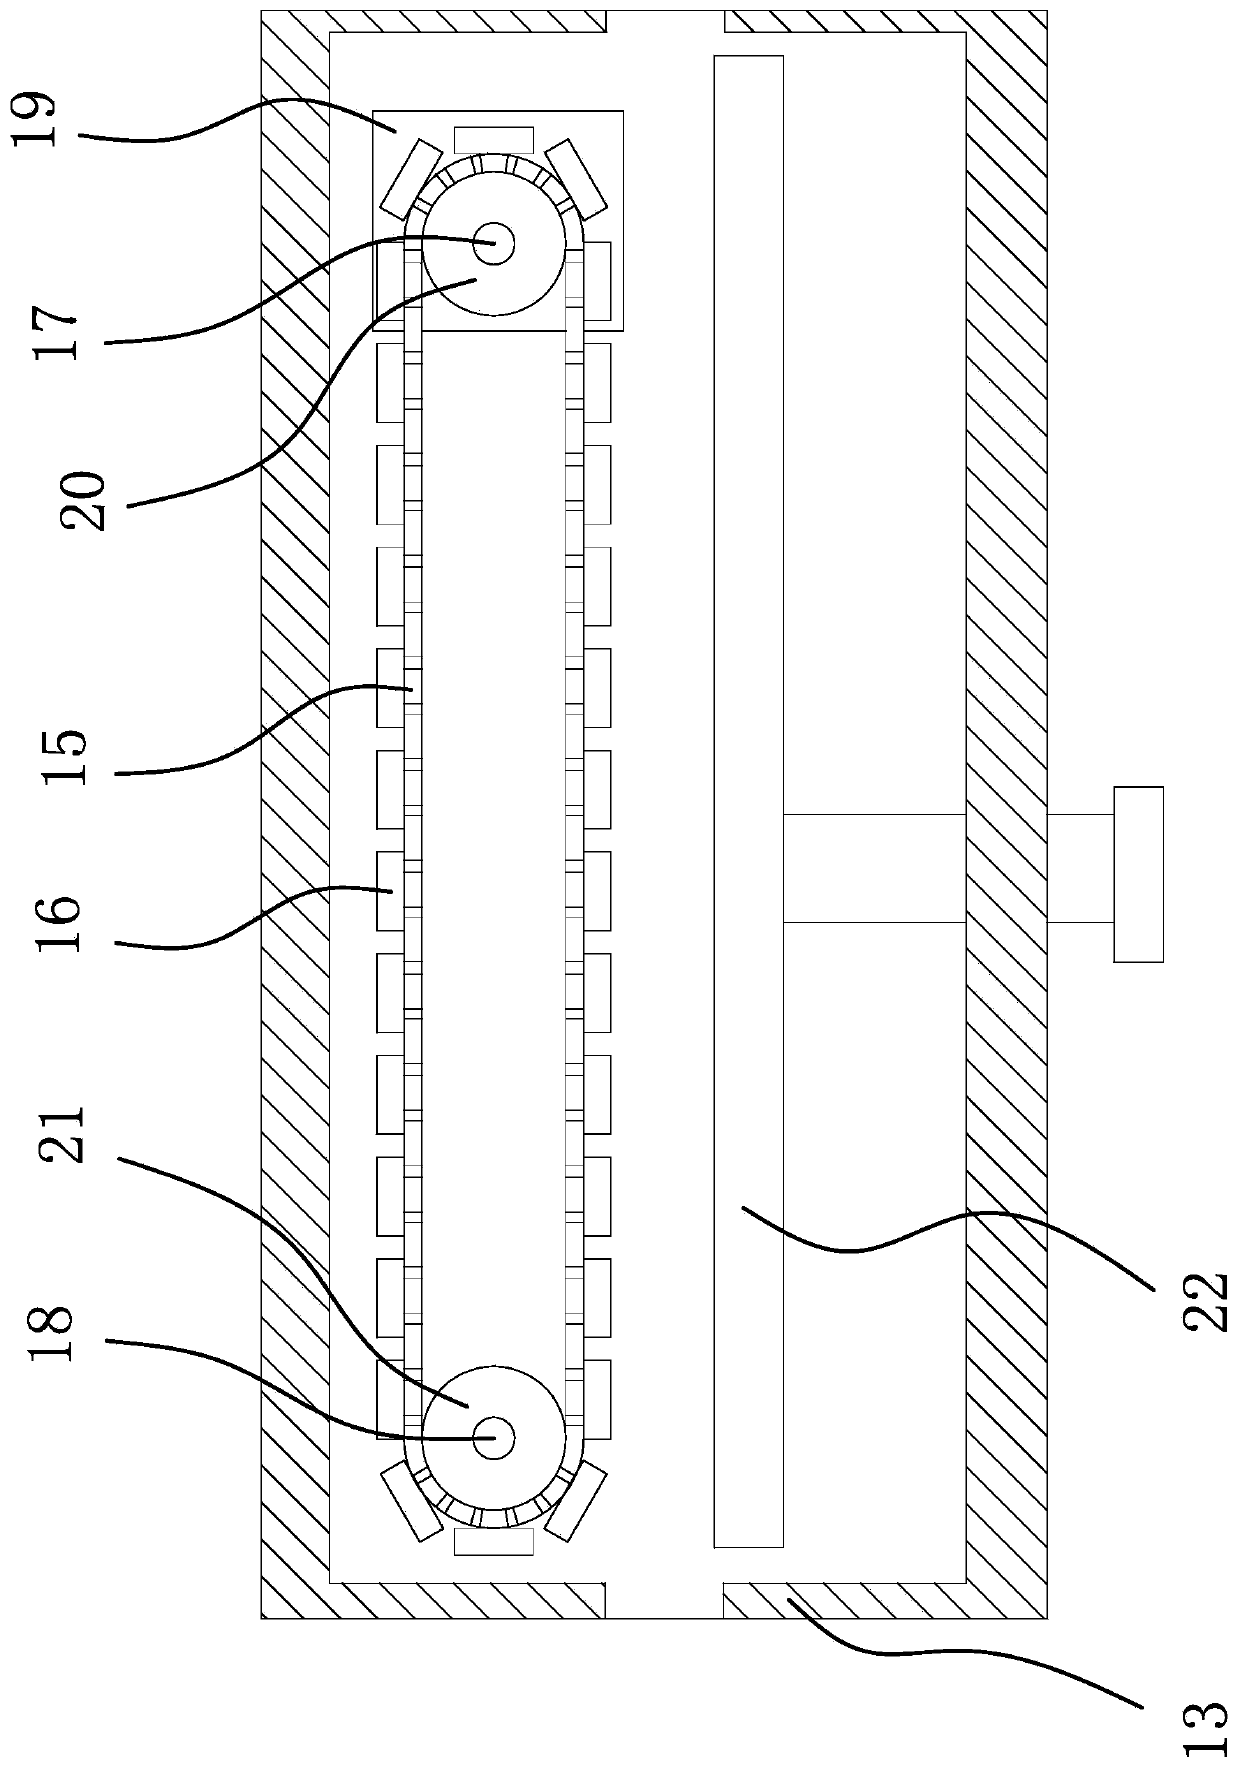 An automatic assembly device for luggage connectors